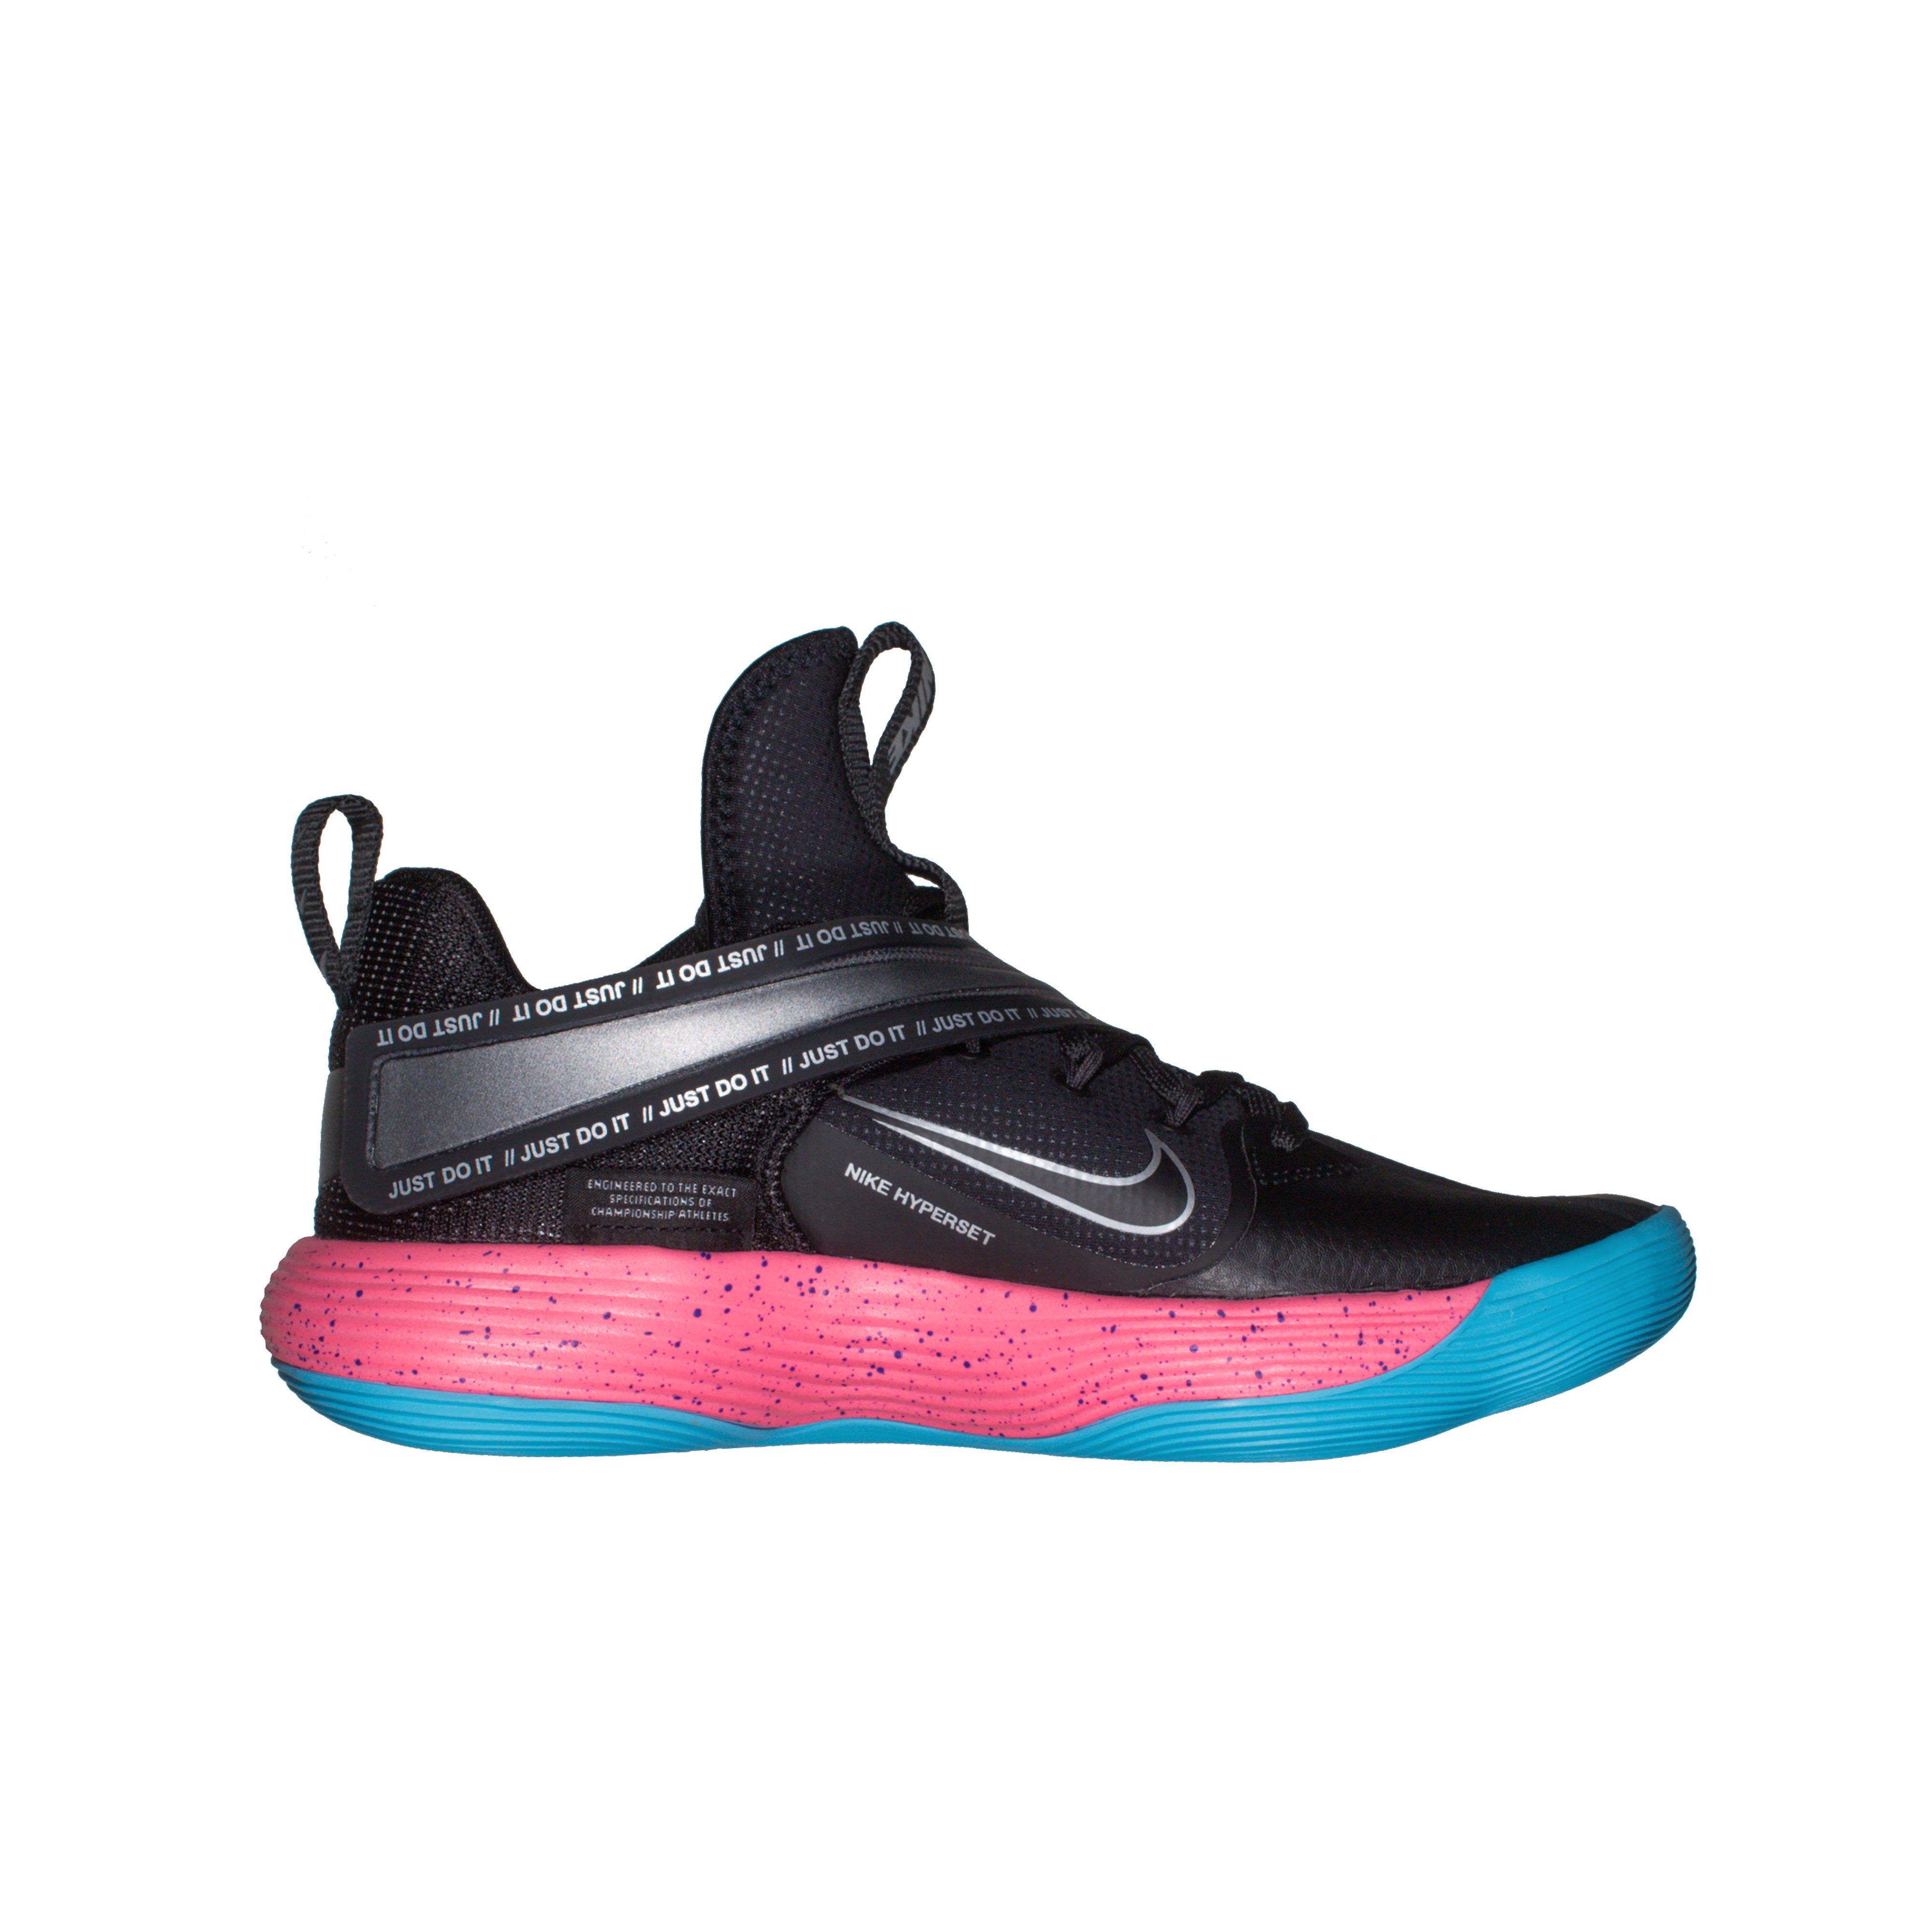 react hyperset volleyball shoes